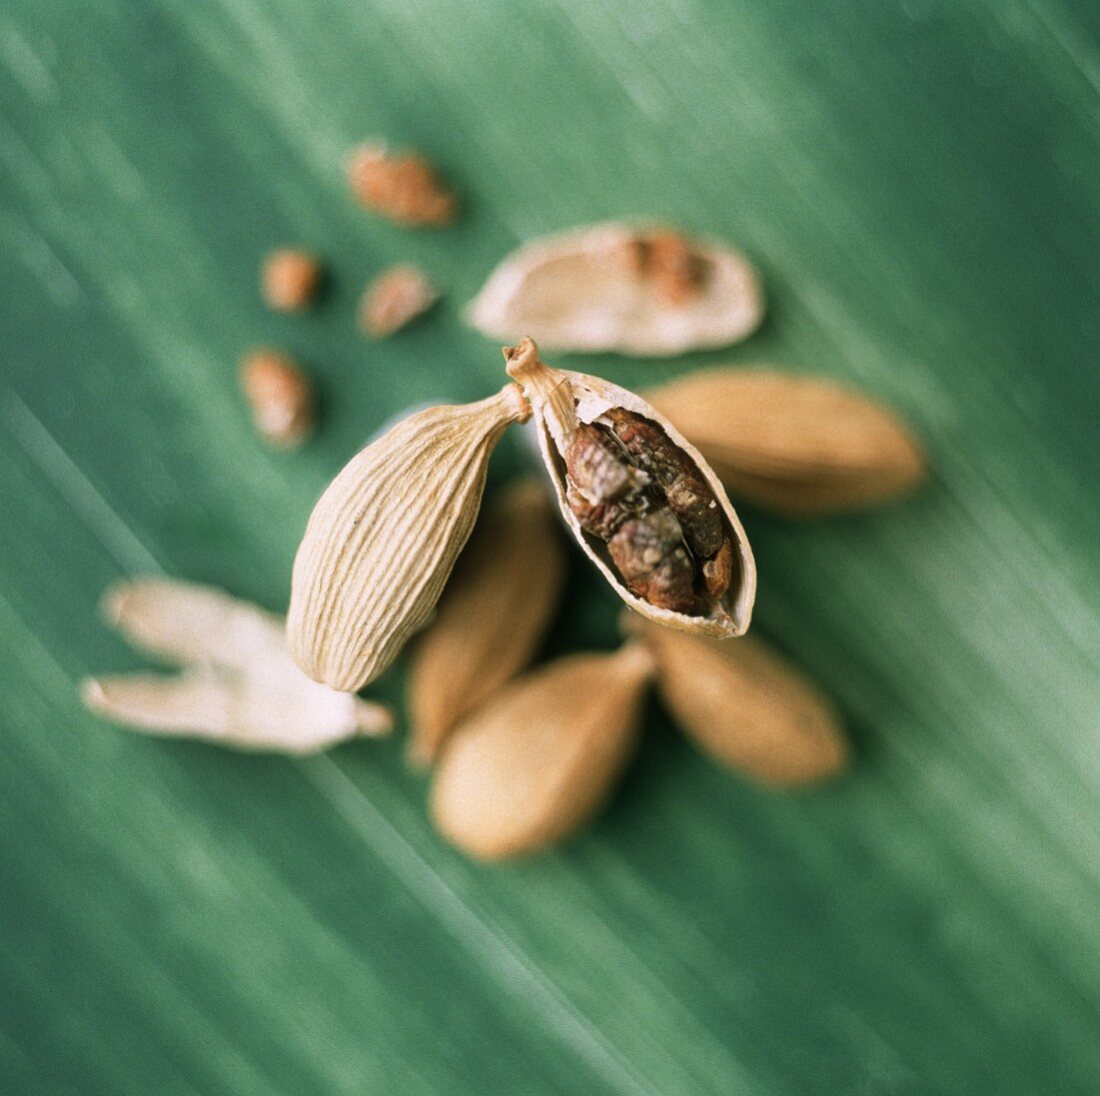 Cardamom capsules, some opened, on green background